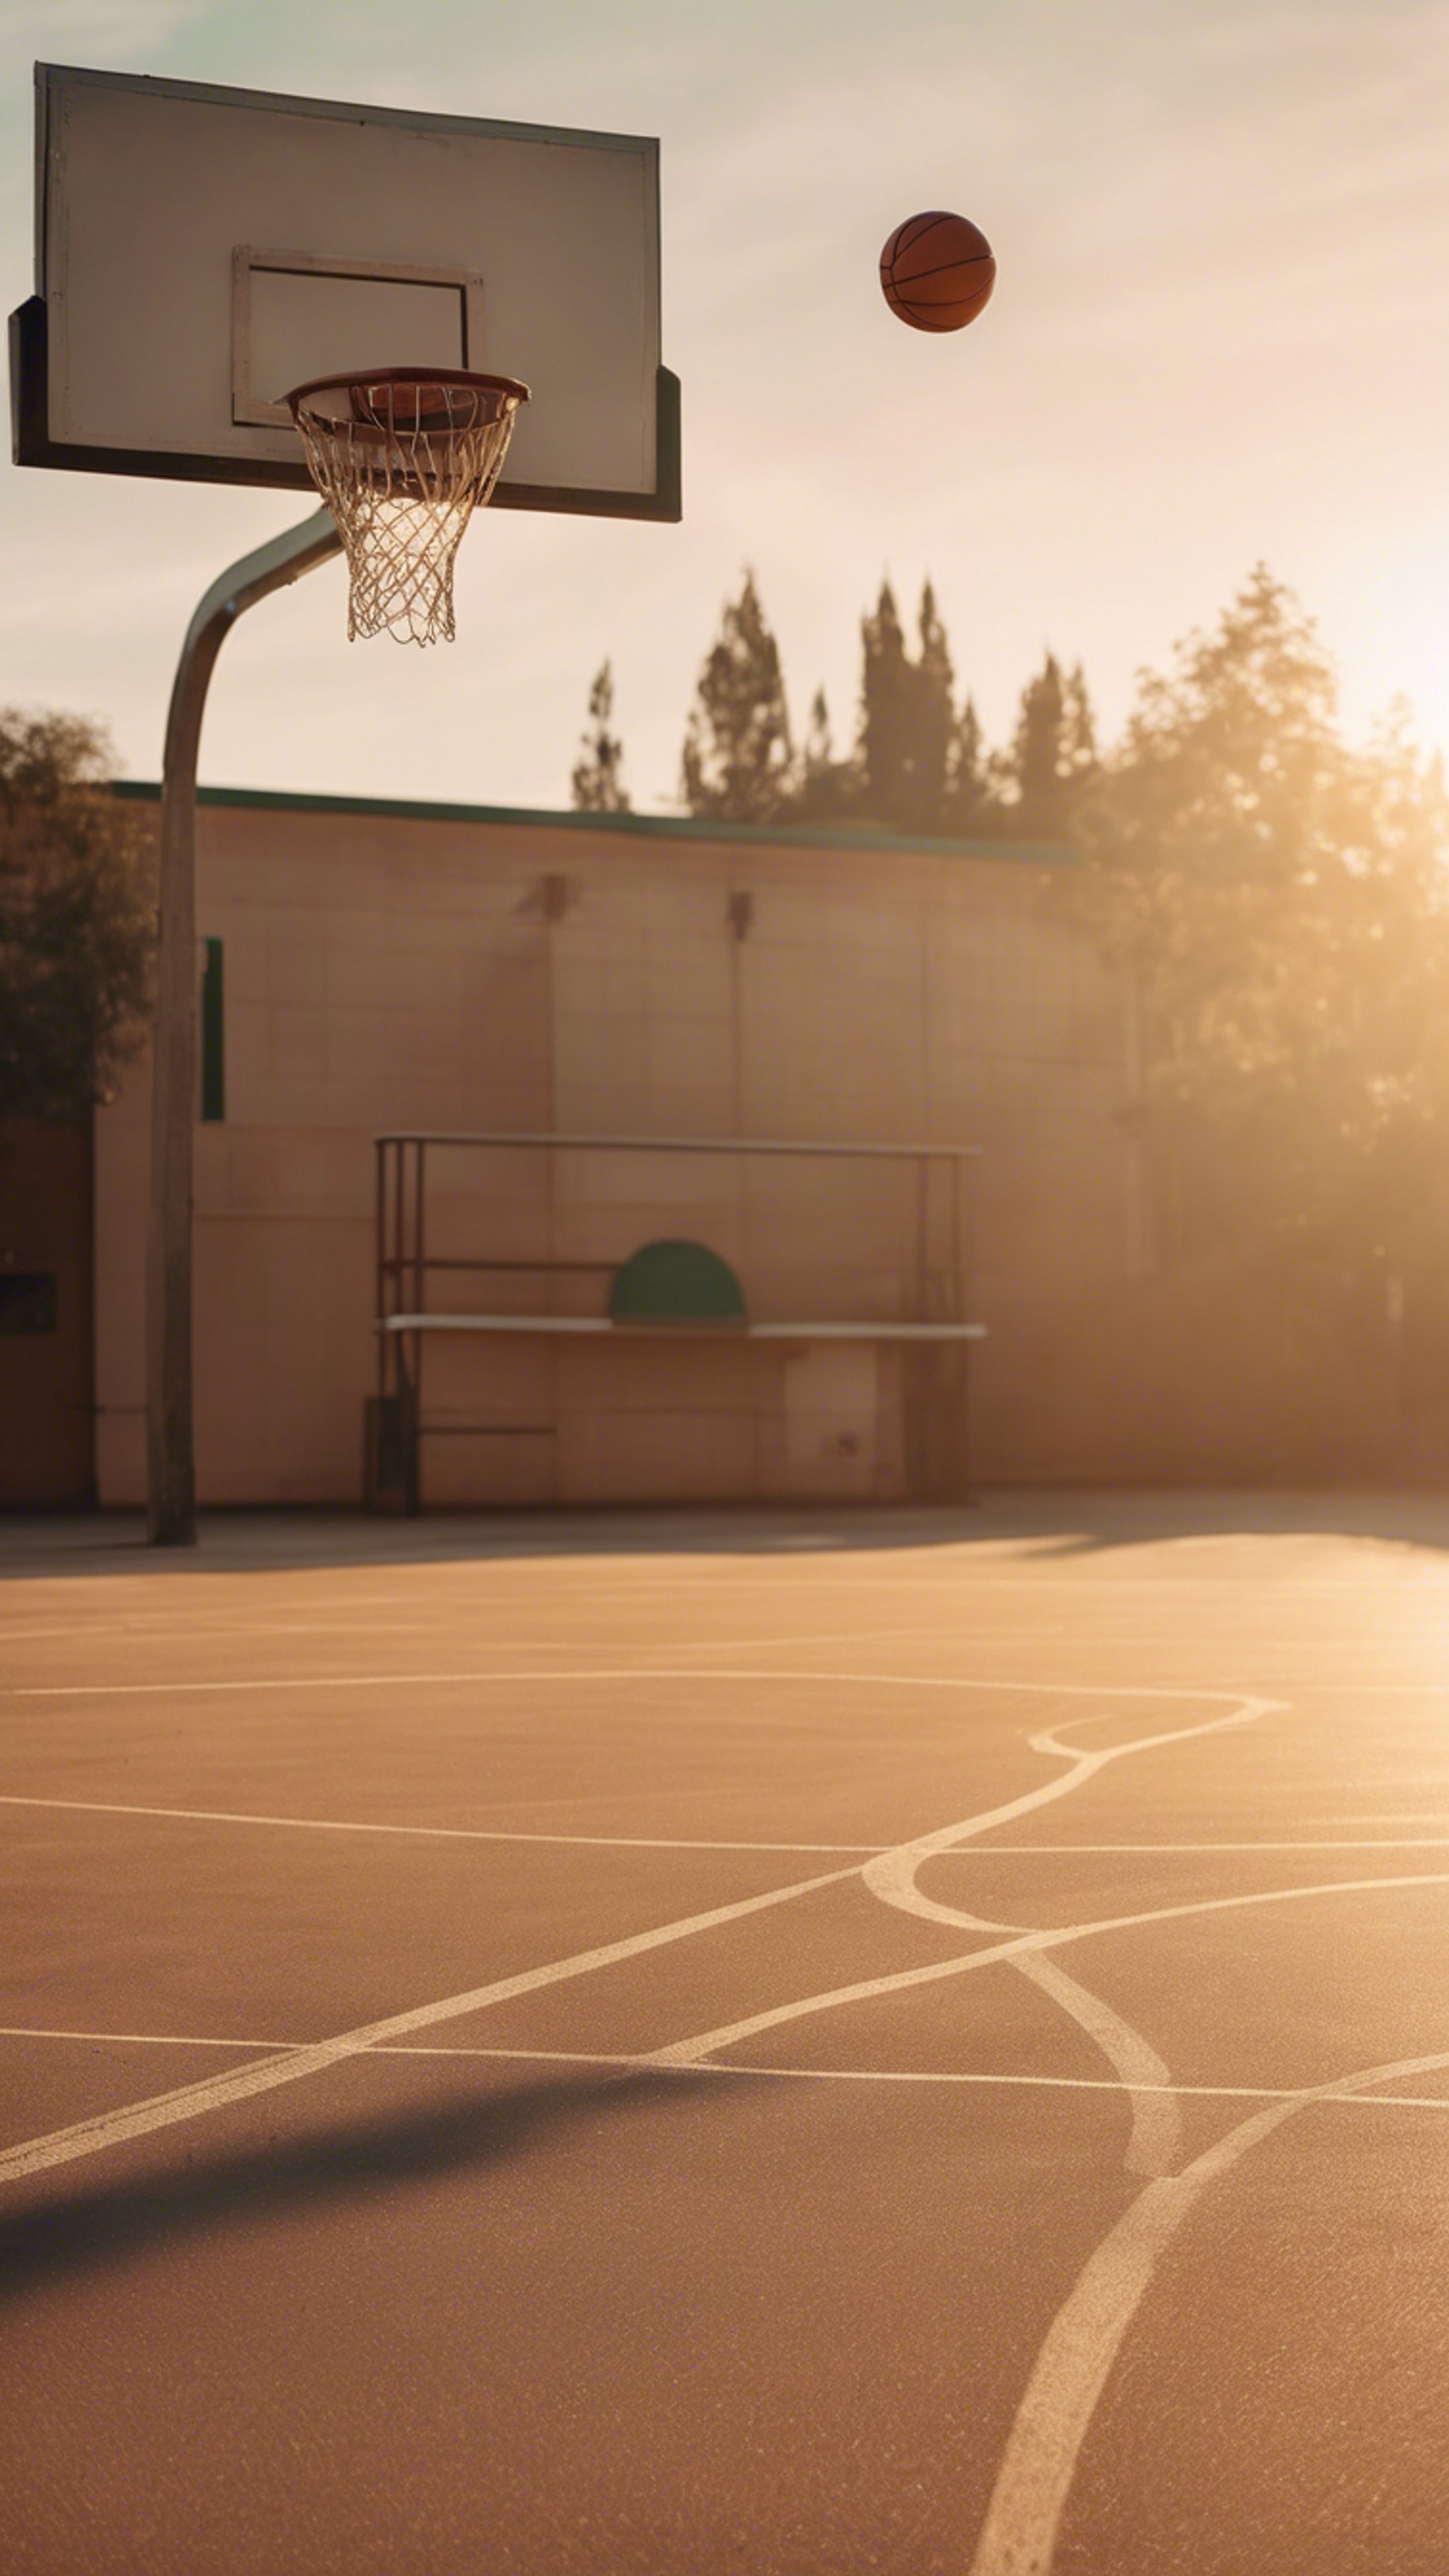 A deserted school’s basketball court in the pacific golden light of sunset. Tapeet[5d35315ab9de41dcbc38]